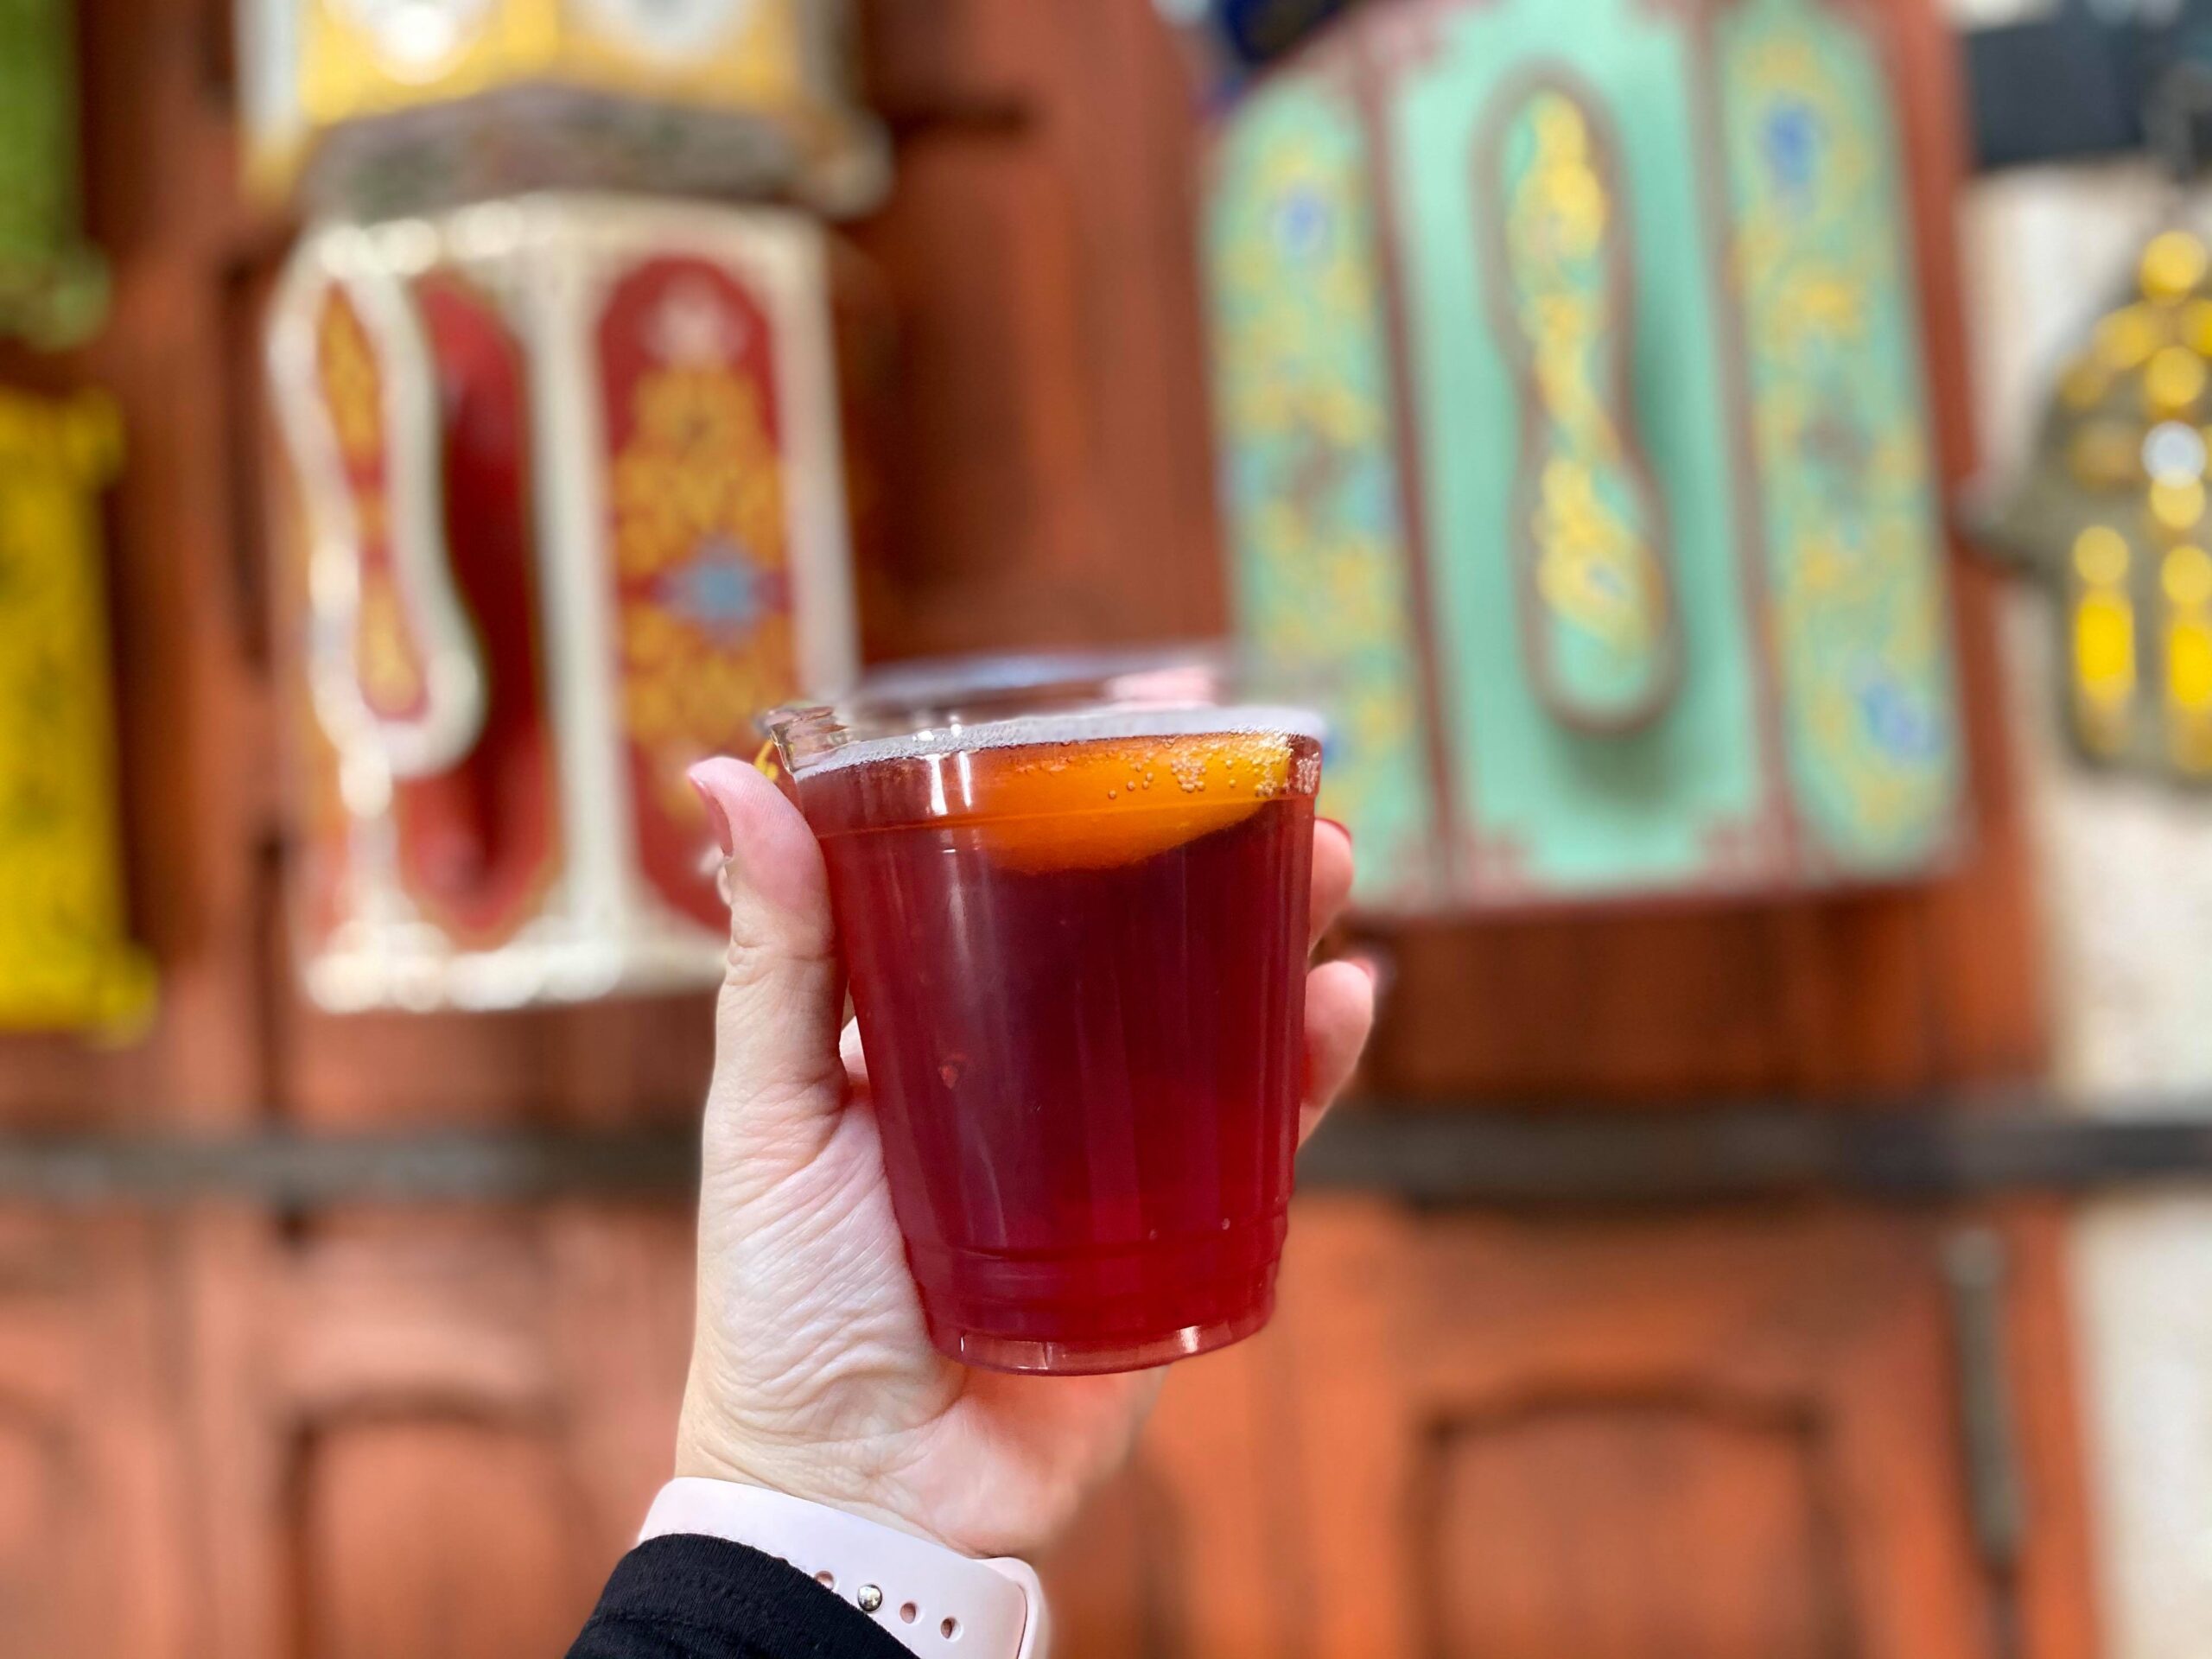 New Morocco Quick Service Spot is now open in Epcot